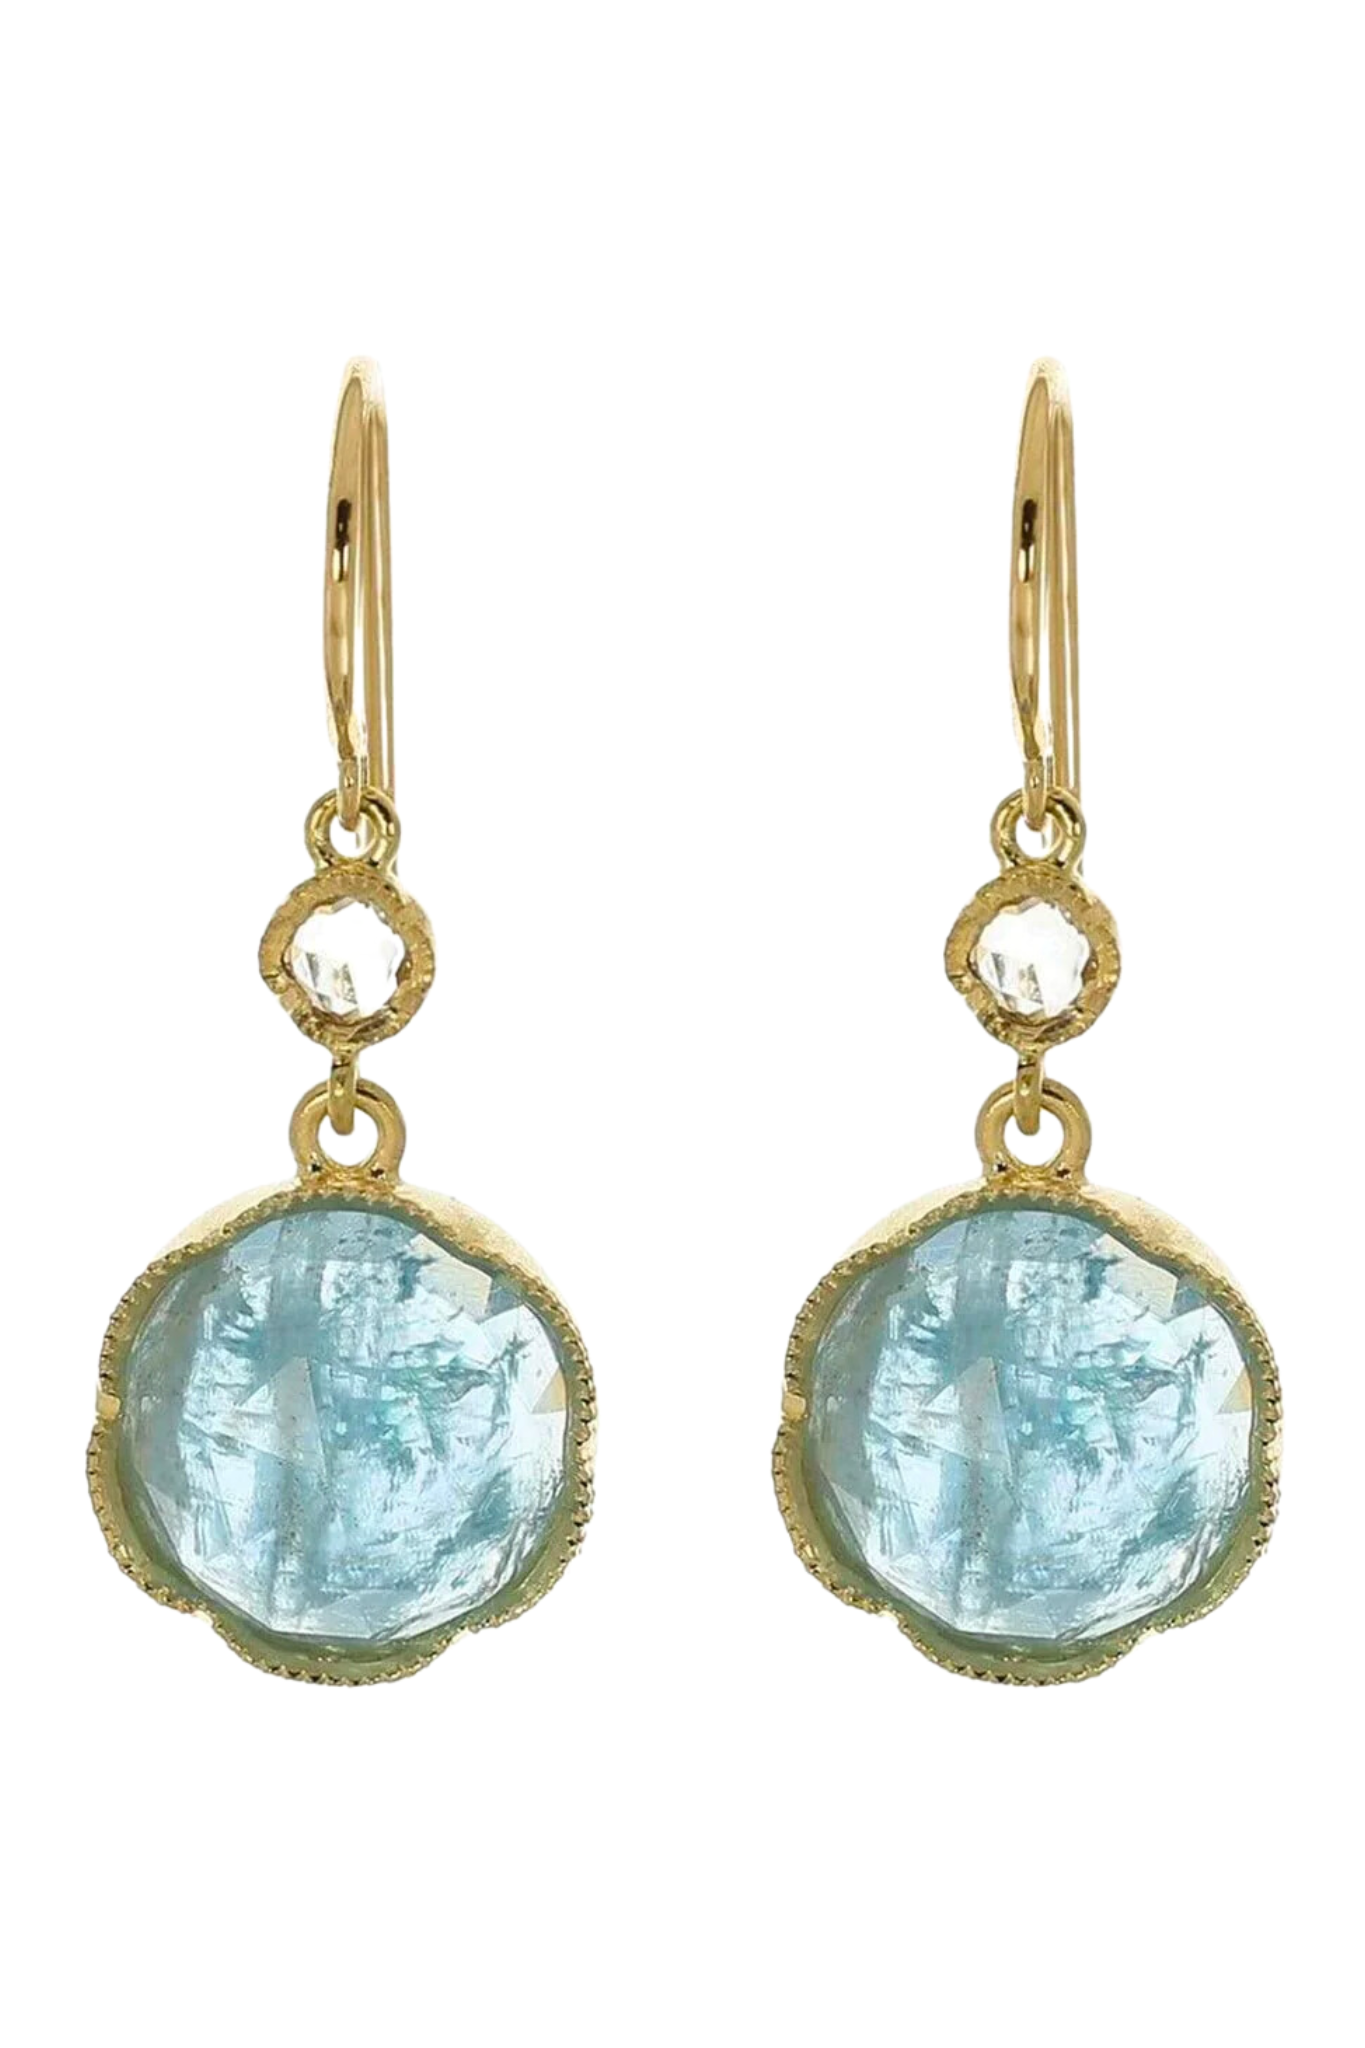 Irene Neuwirth 18k Yellow Gold Earring with 11mm Rose Cut Fine Aquamarine and 3mm Rose Cut Diamonds (0.16 cts)